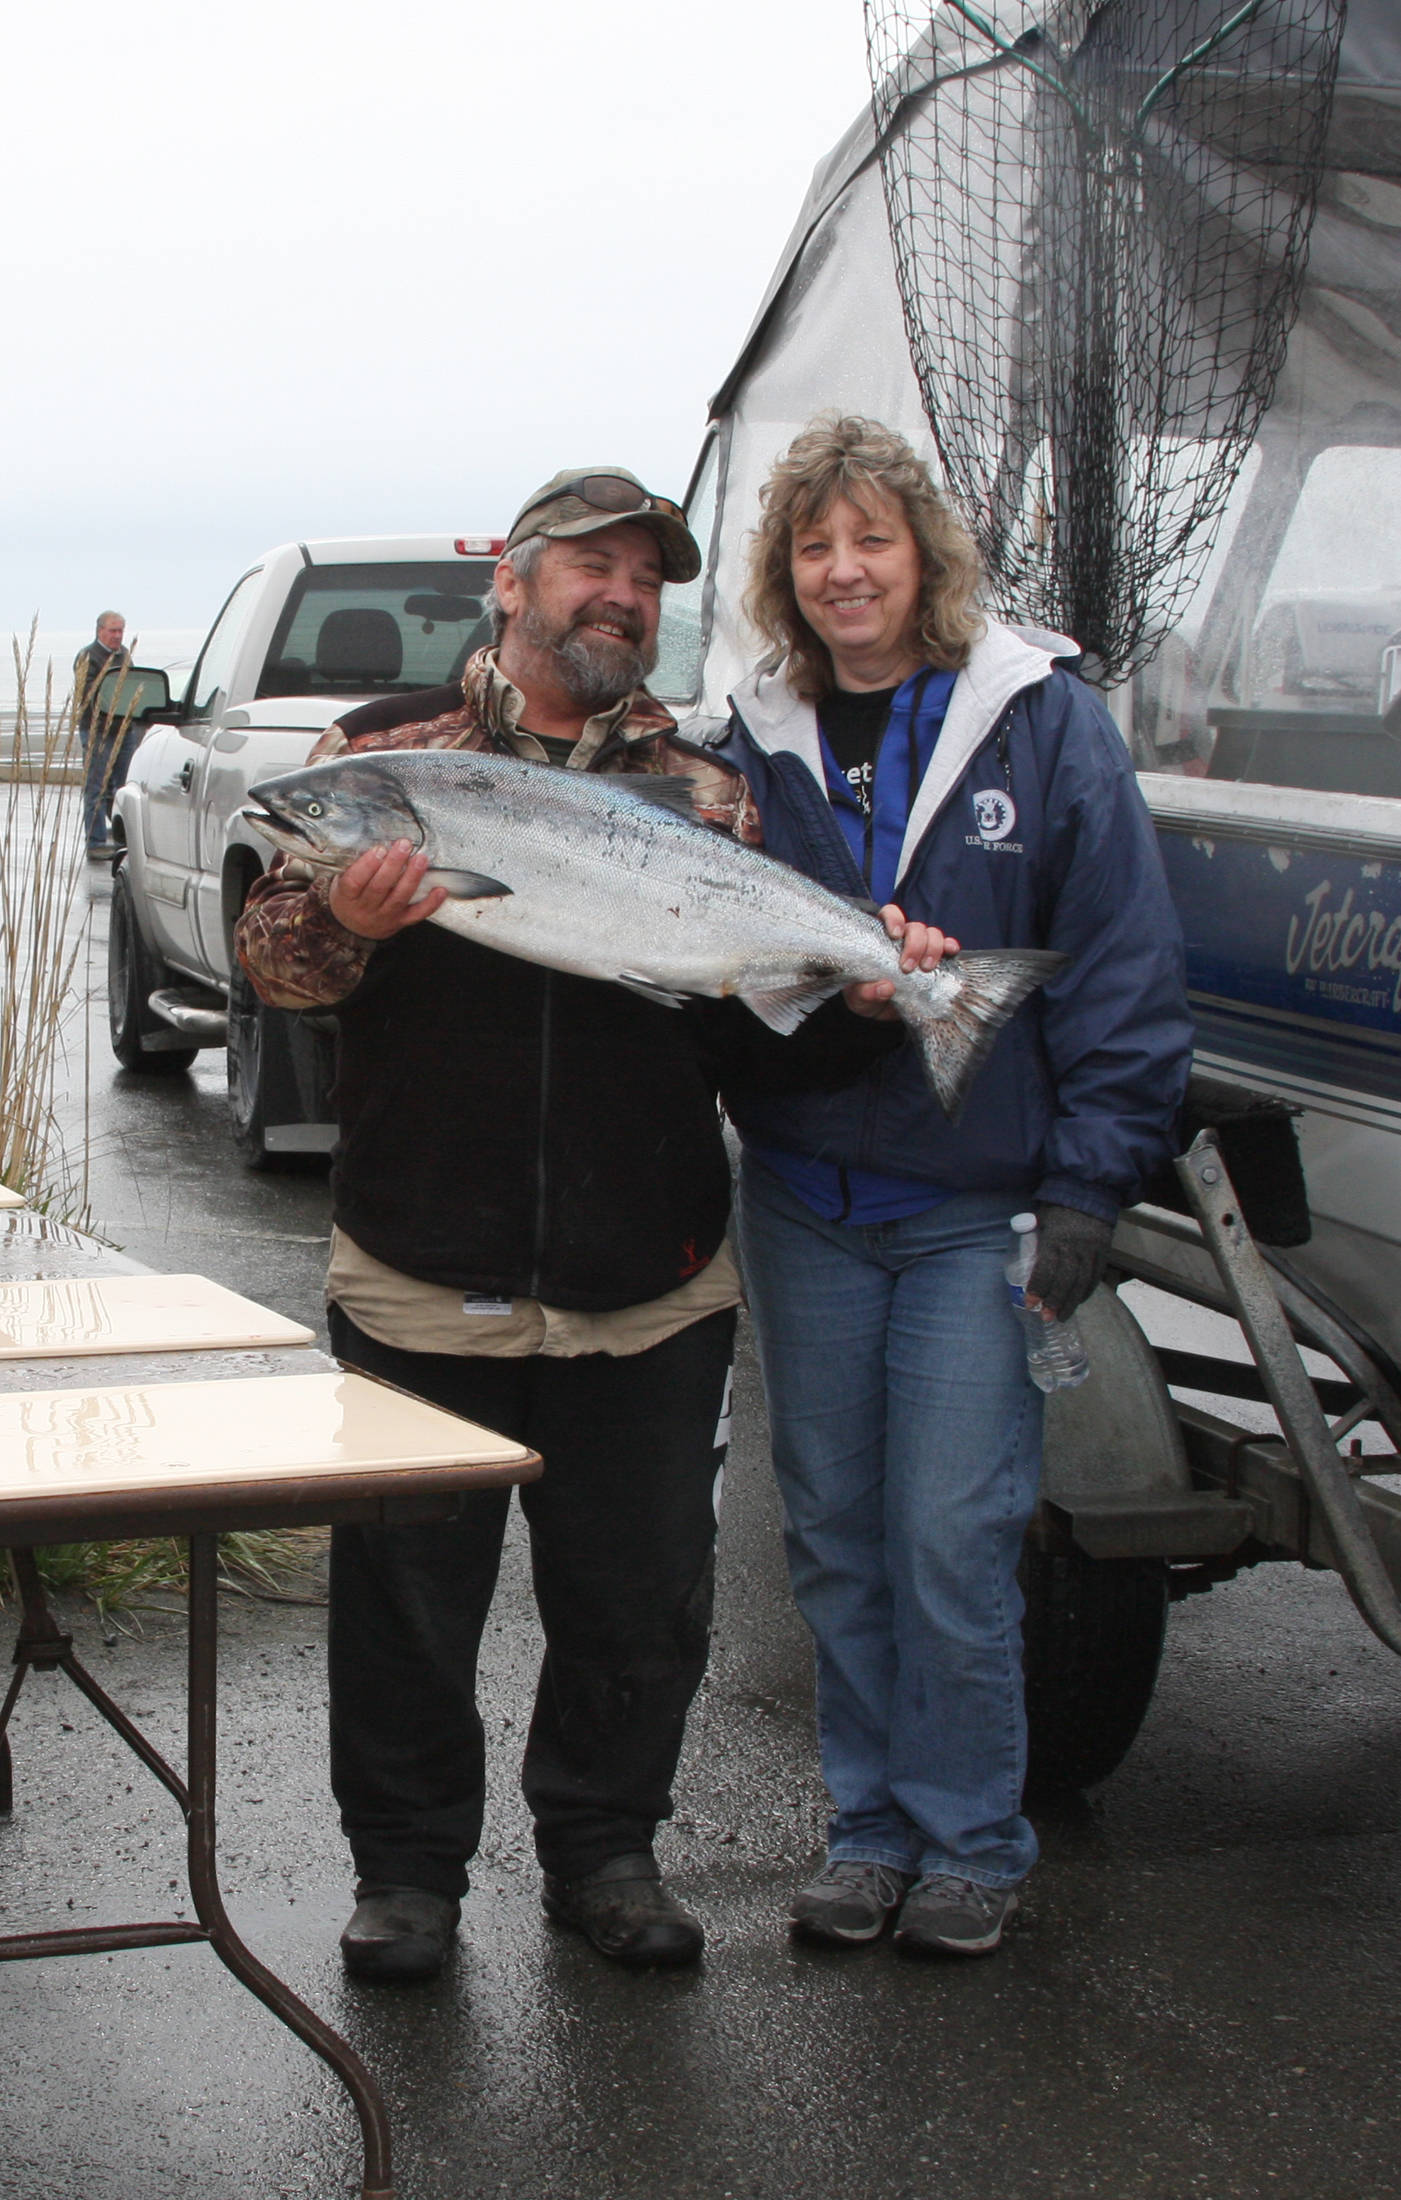 John and Yvonne Ketelle of Home pose with one of the two king salmon caught on their boat, Circus Circus, at the weigh-in station during the Anchor Point Calcutta on Sunday, May 12 in Anchor Point, Alaska. (Photo by Delcenia Cosman)